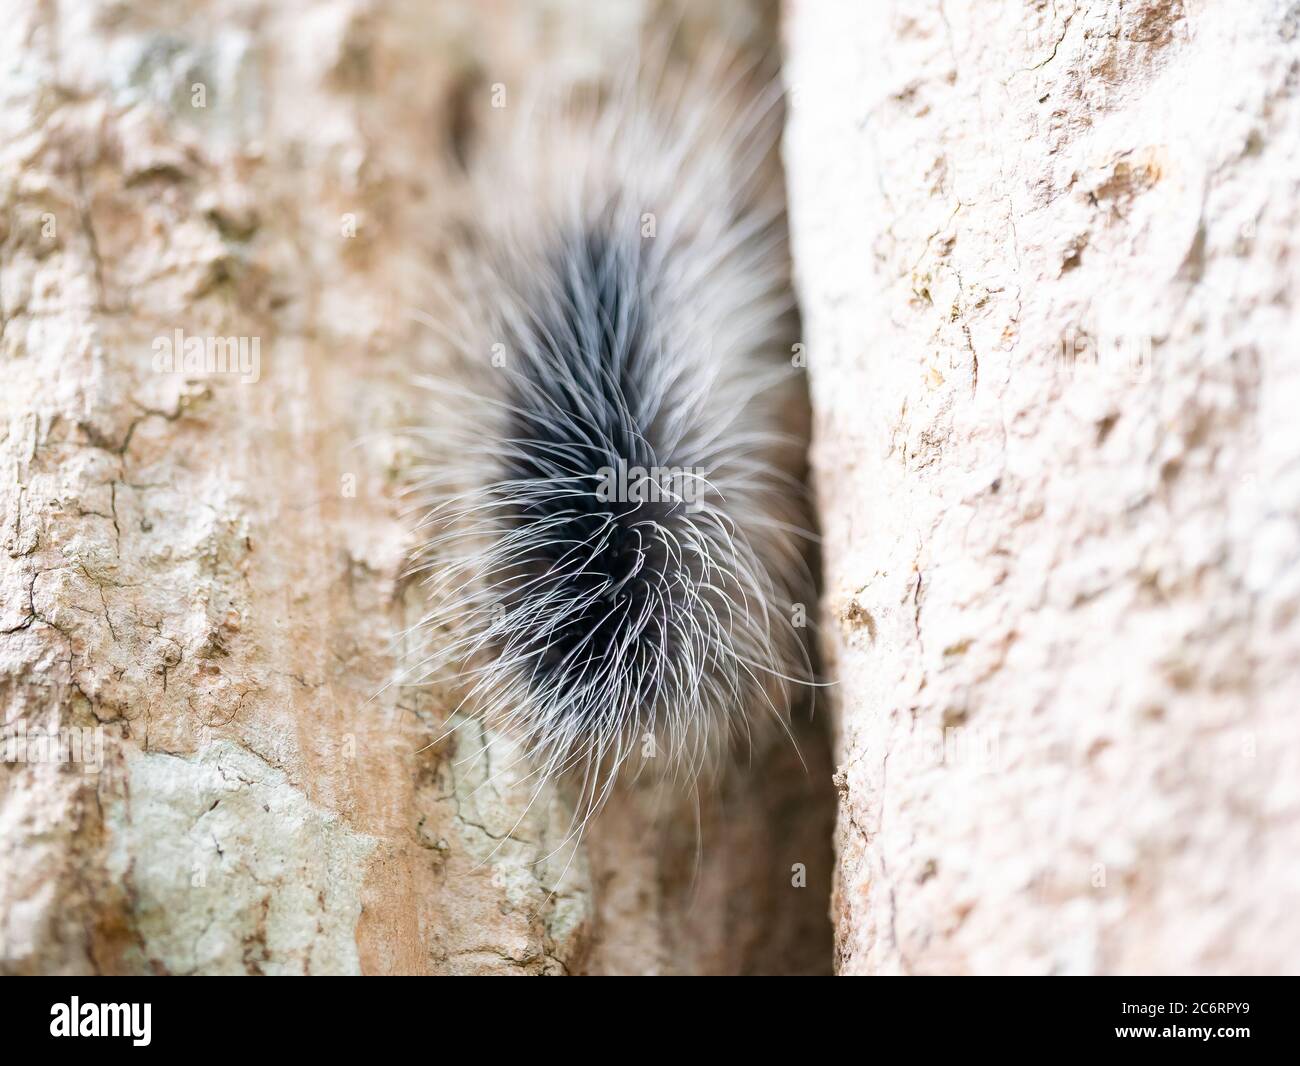 Black hairy catterpillar or large hairy worm on bark of tree trunk in natural tropical forest. Stock Photo